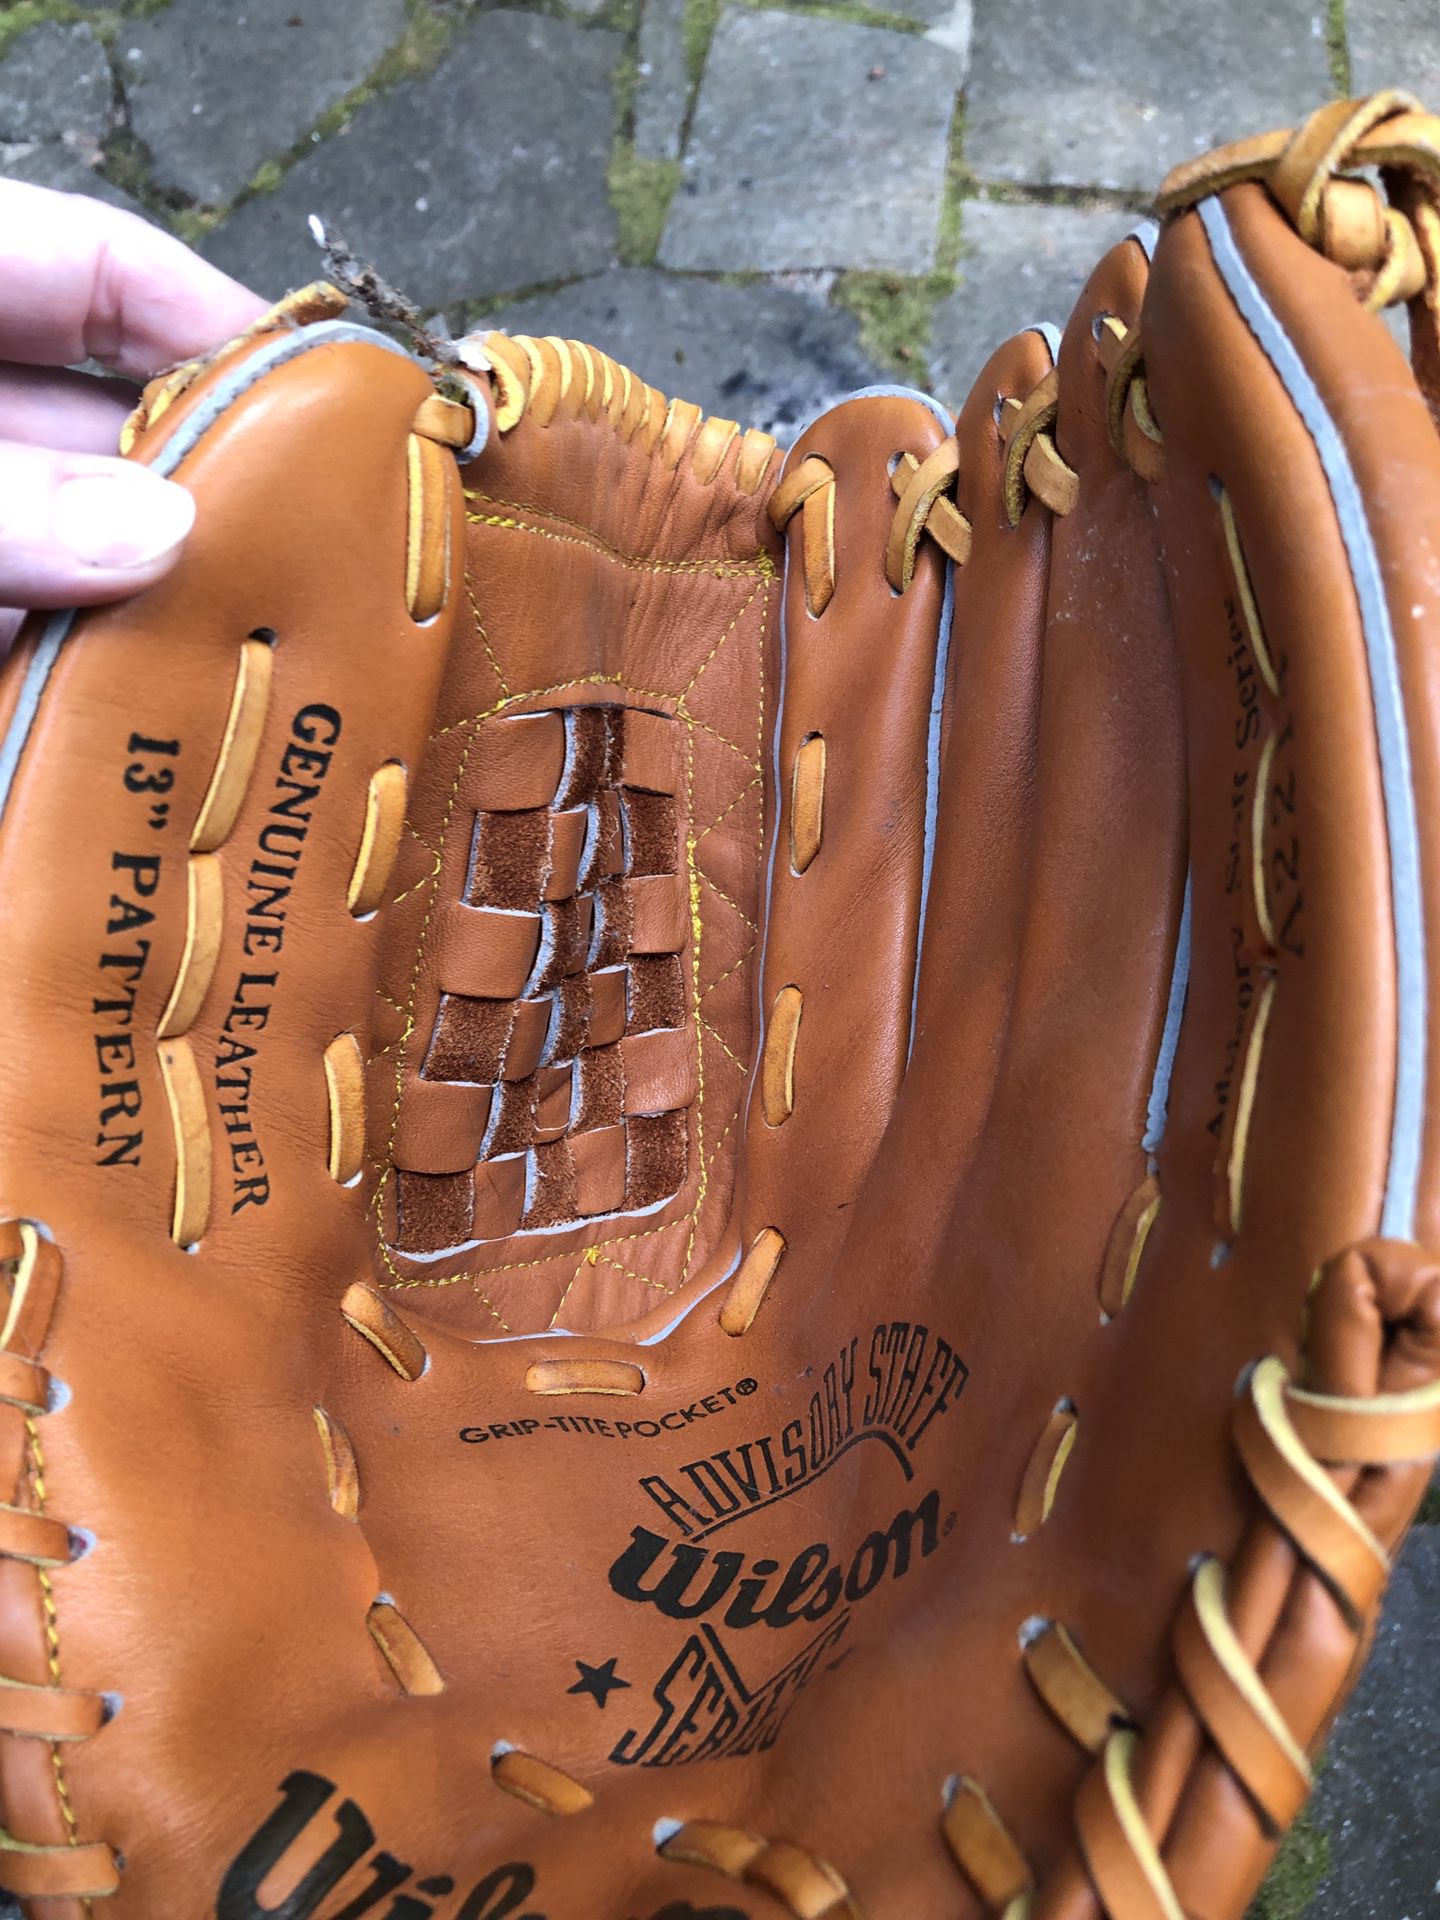 Wilson Youth Baseball Glove - excellent condition